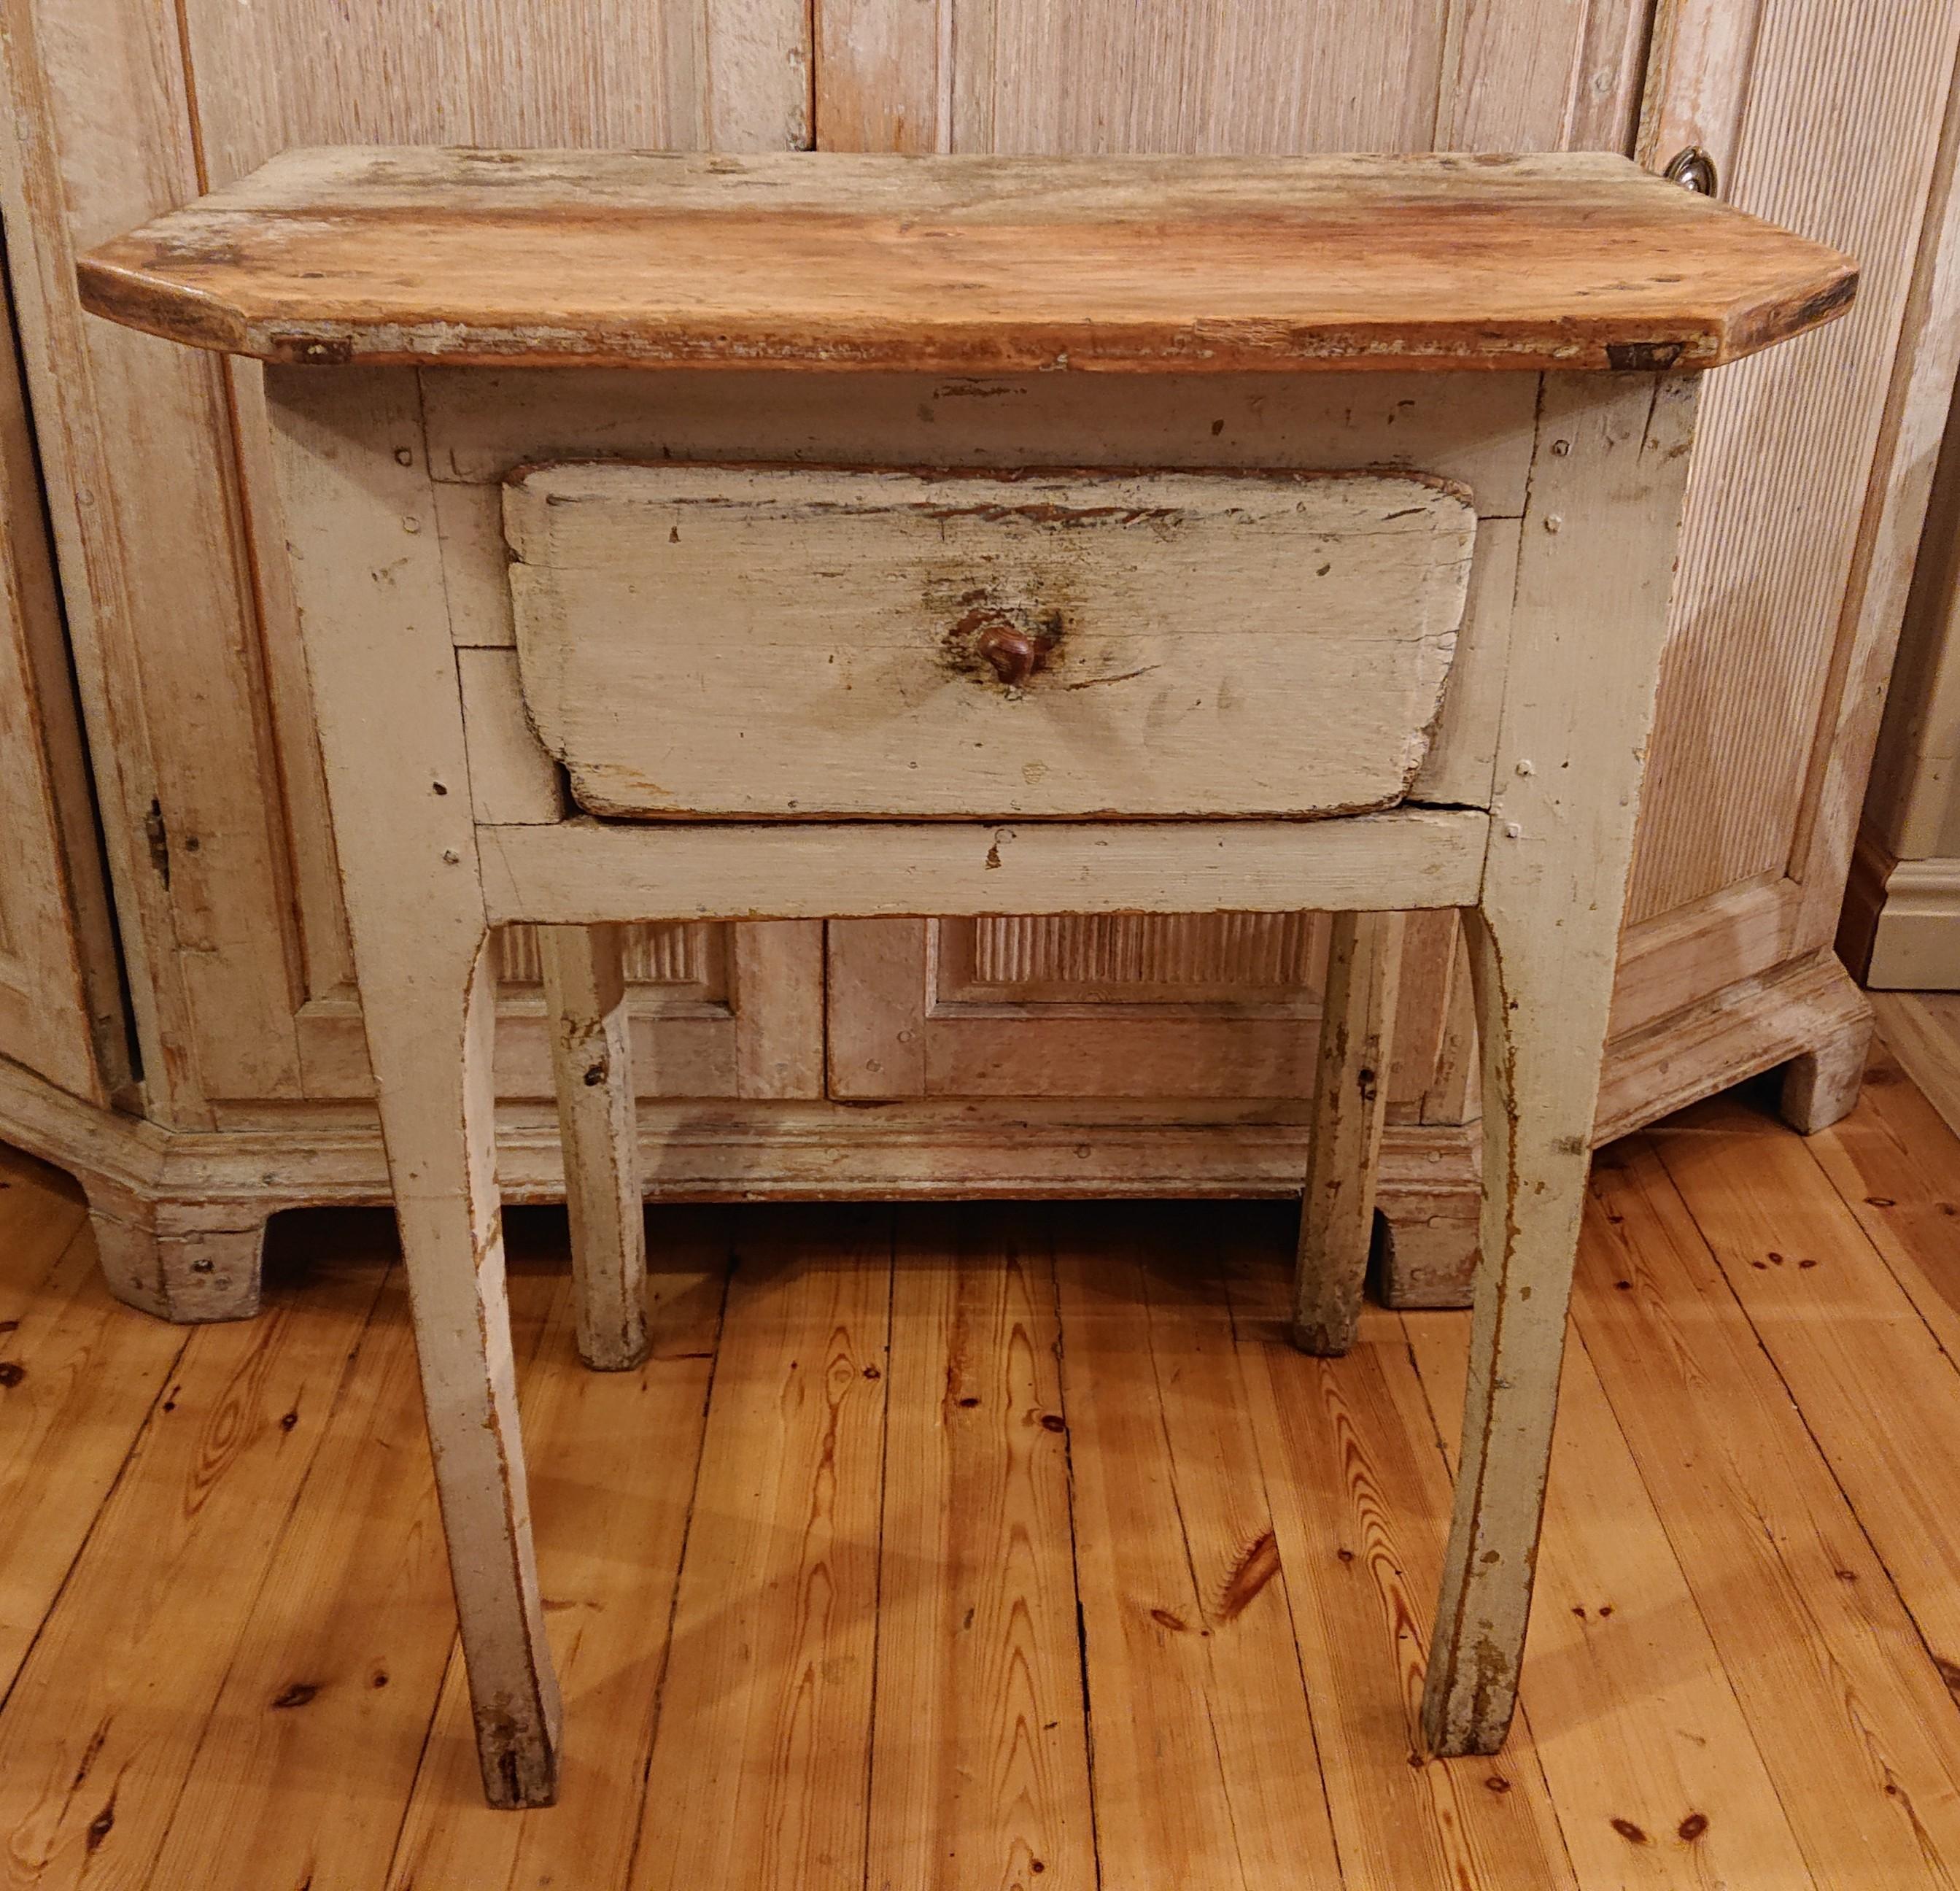 19th century Swedish Folk art table with drawer from Umeå Västerbotten, Northern Sweden.
Very charming & rustic Folk art table with a drawer.
It has untouched original paint.
The table has a lovely patina after many years of use.
Stable in